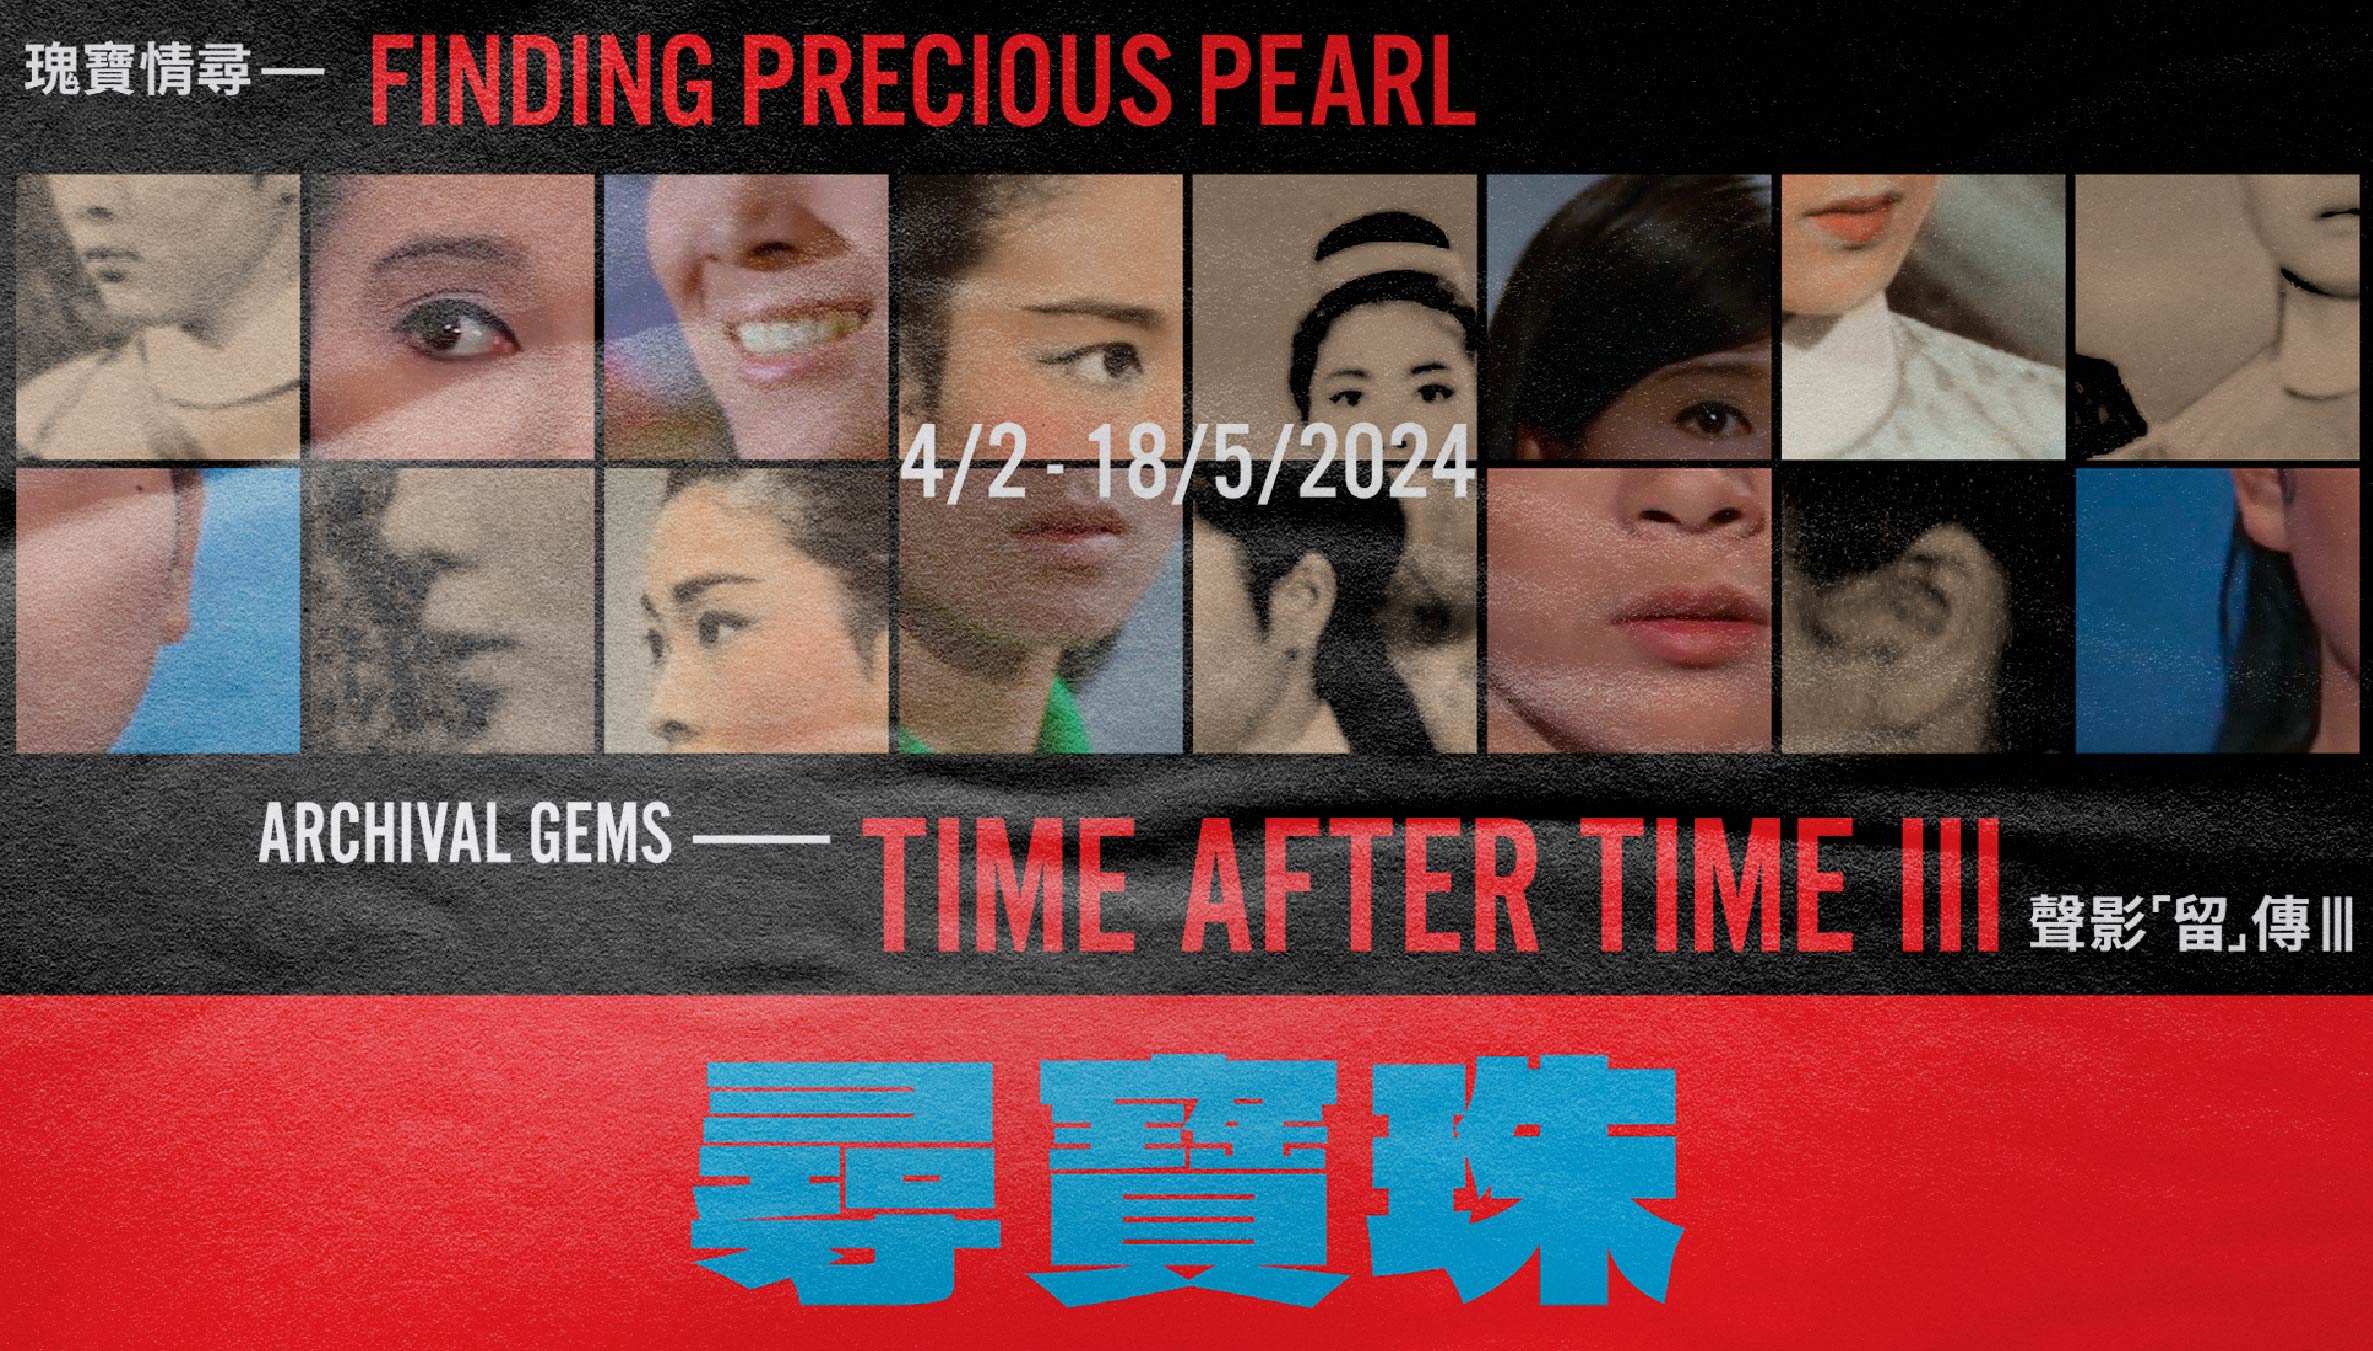 Archival Gems – Time After Time III – Finding Precious Pearl